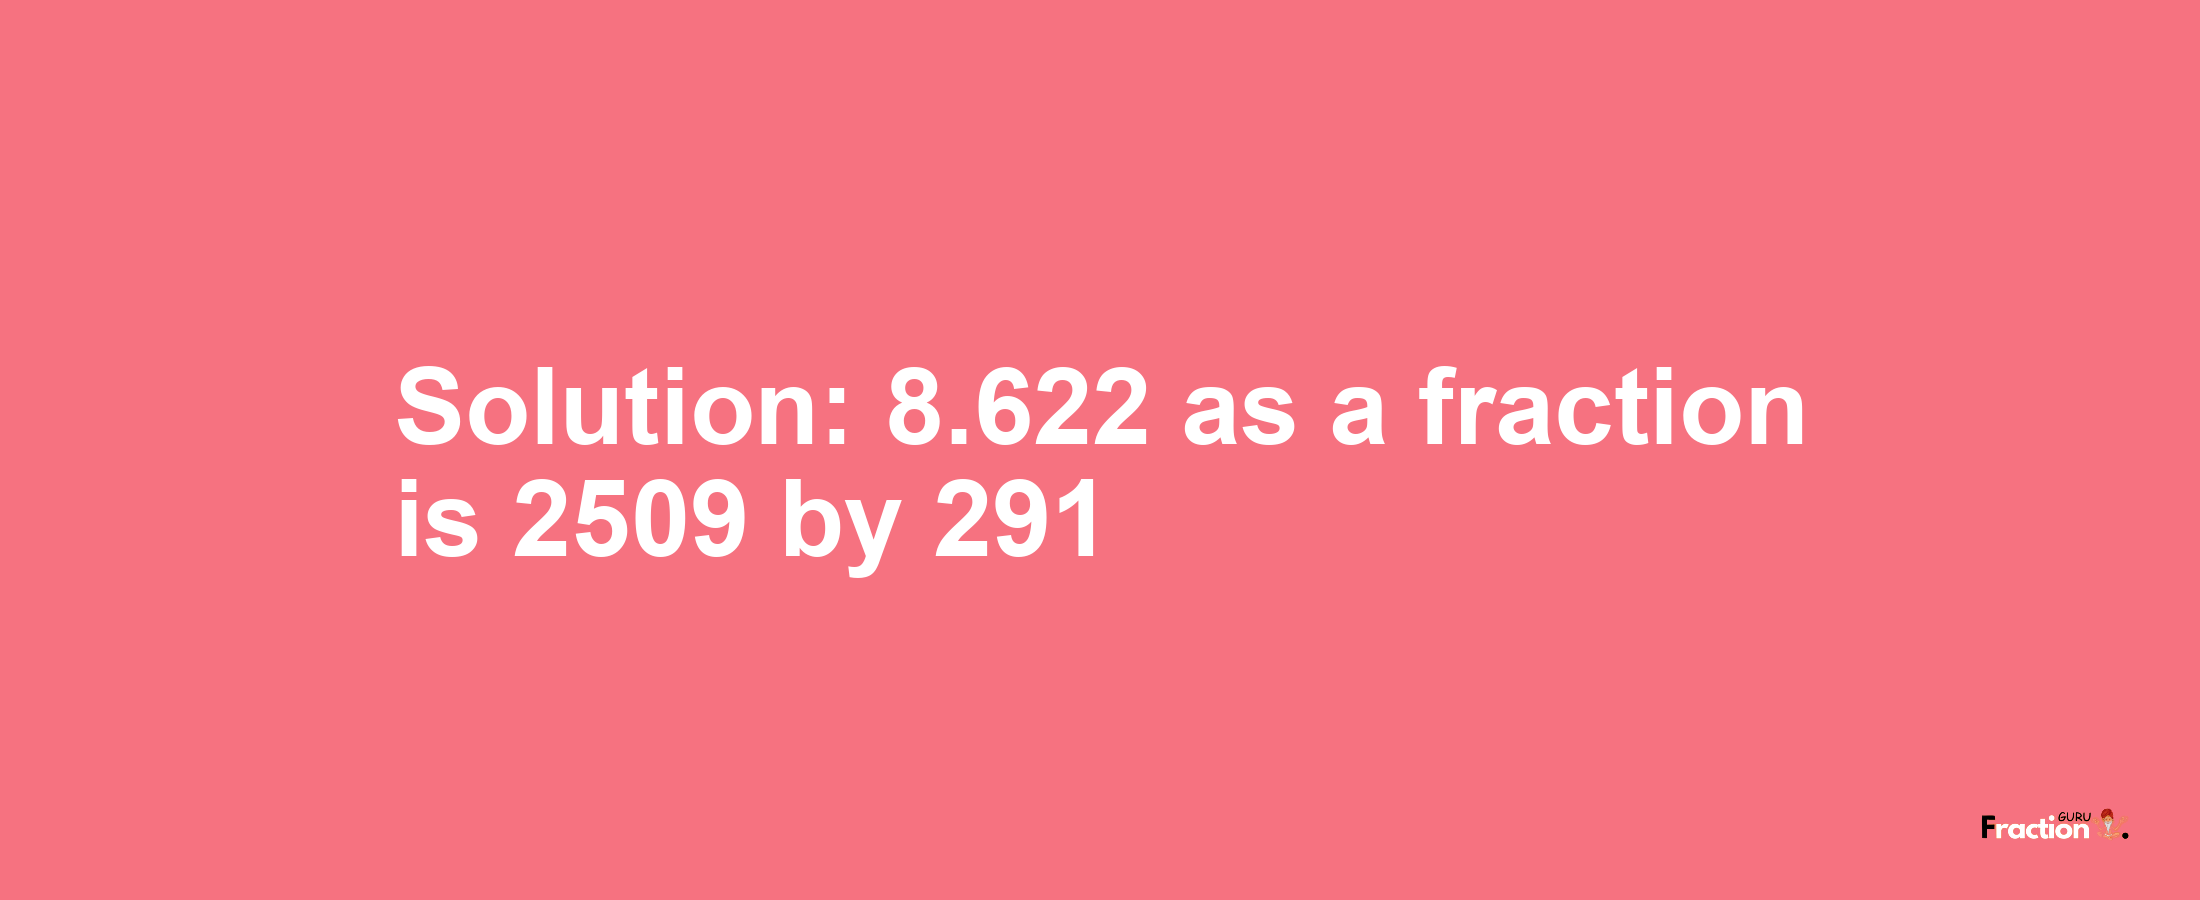 Solution:8.622 as a fraction is 2509/291